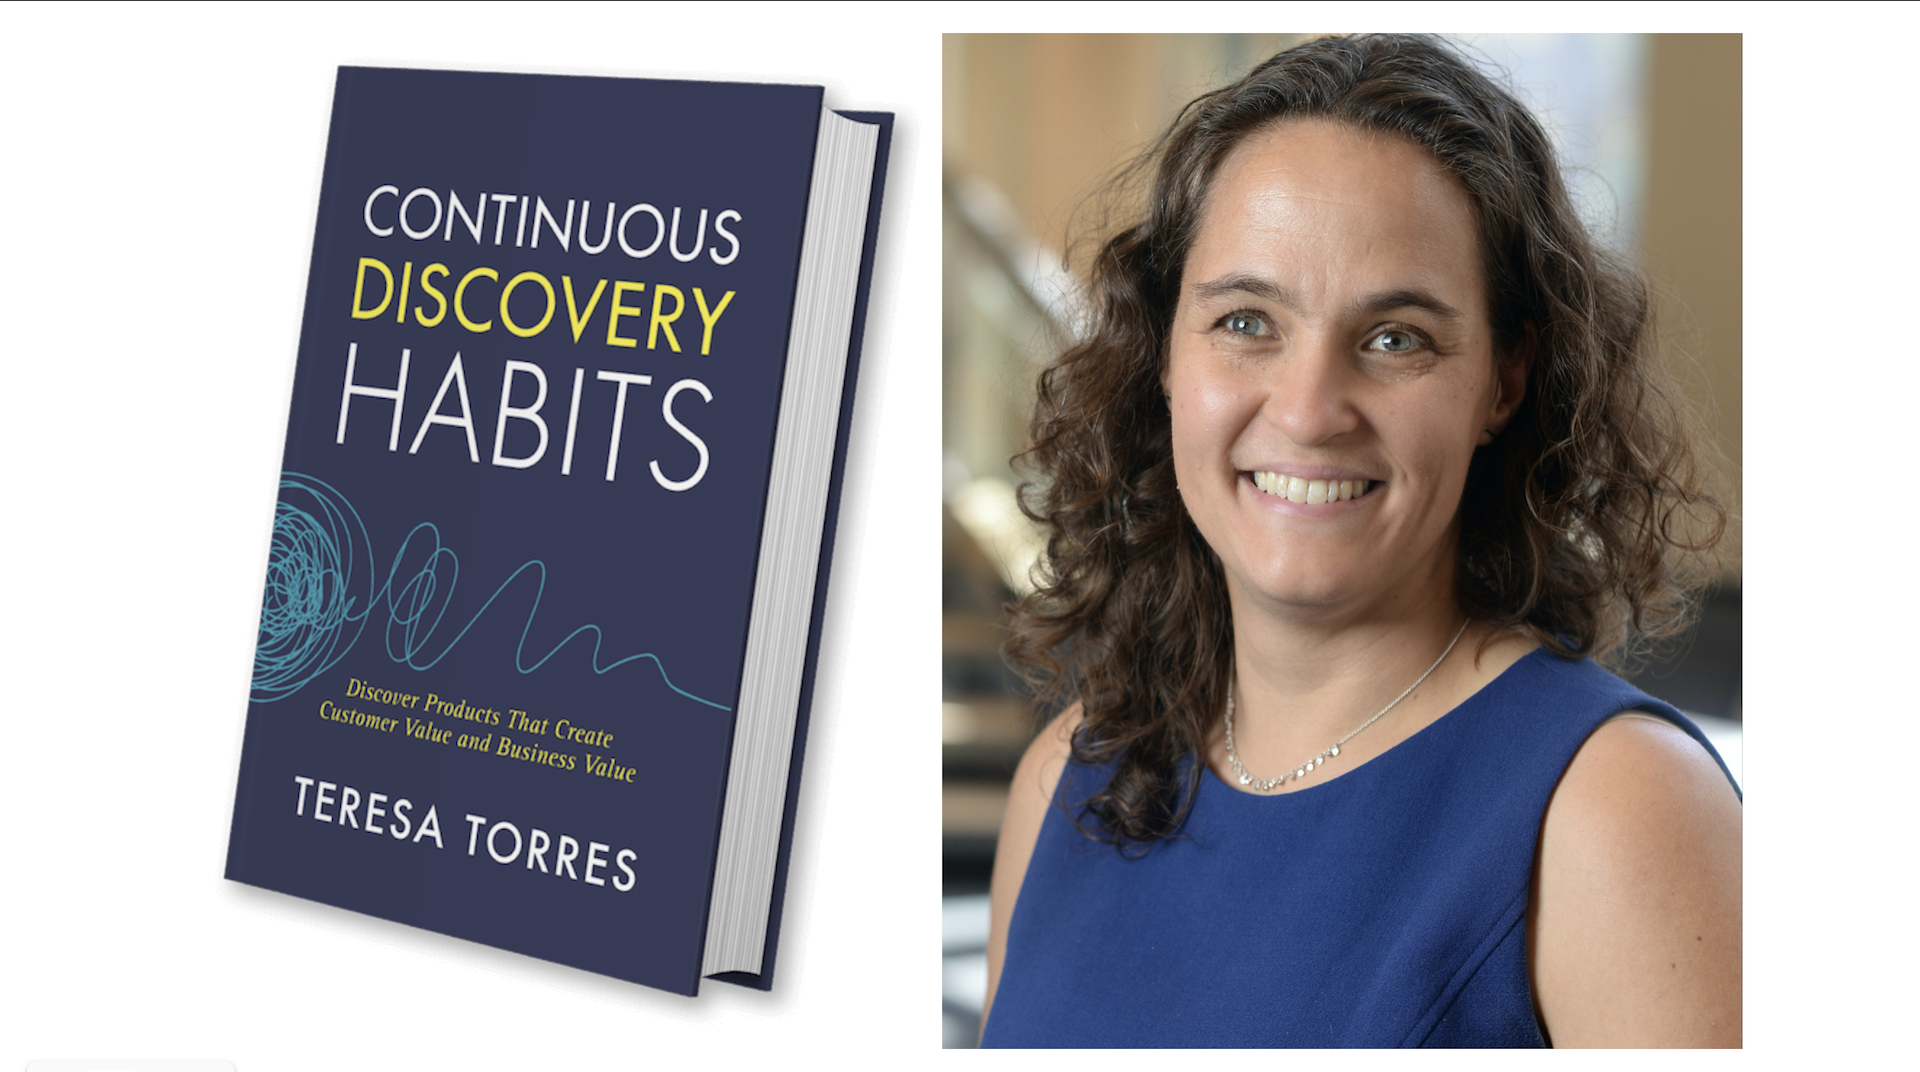 Teresa Torres alongside her book cover, Continuous Discovery Habits.